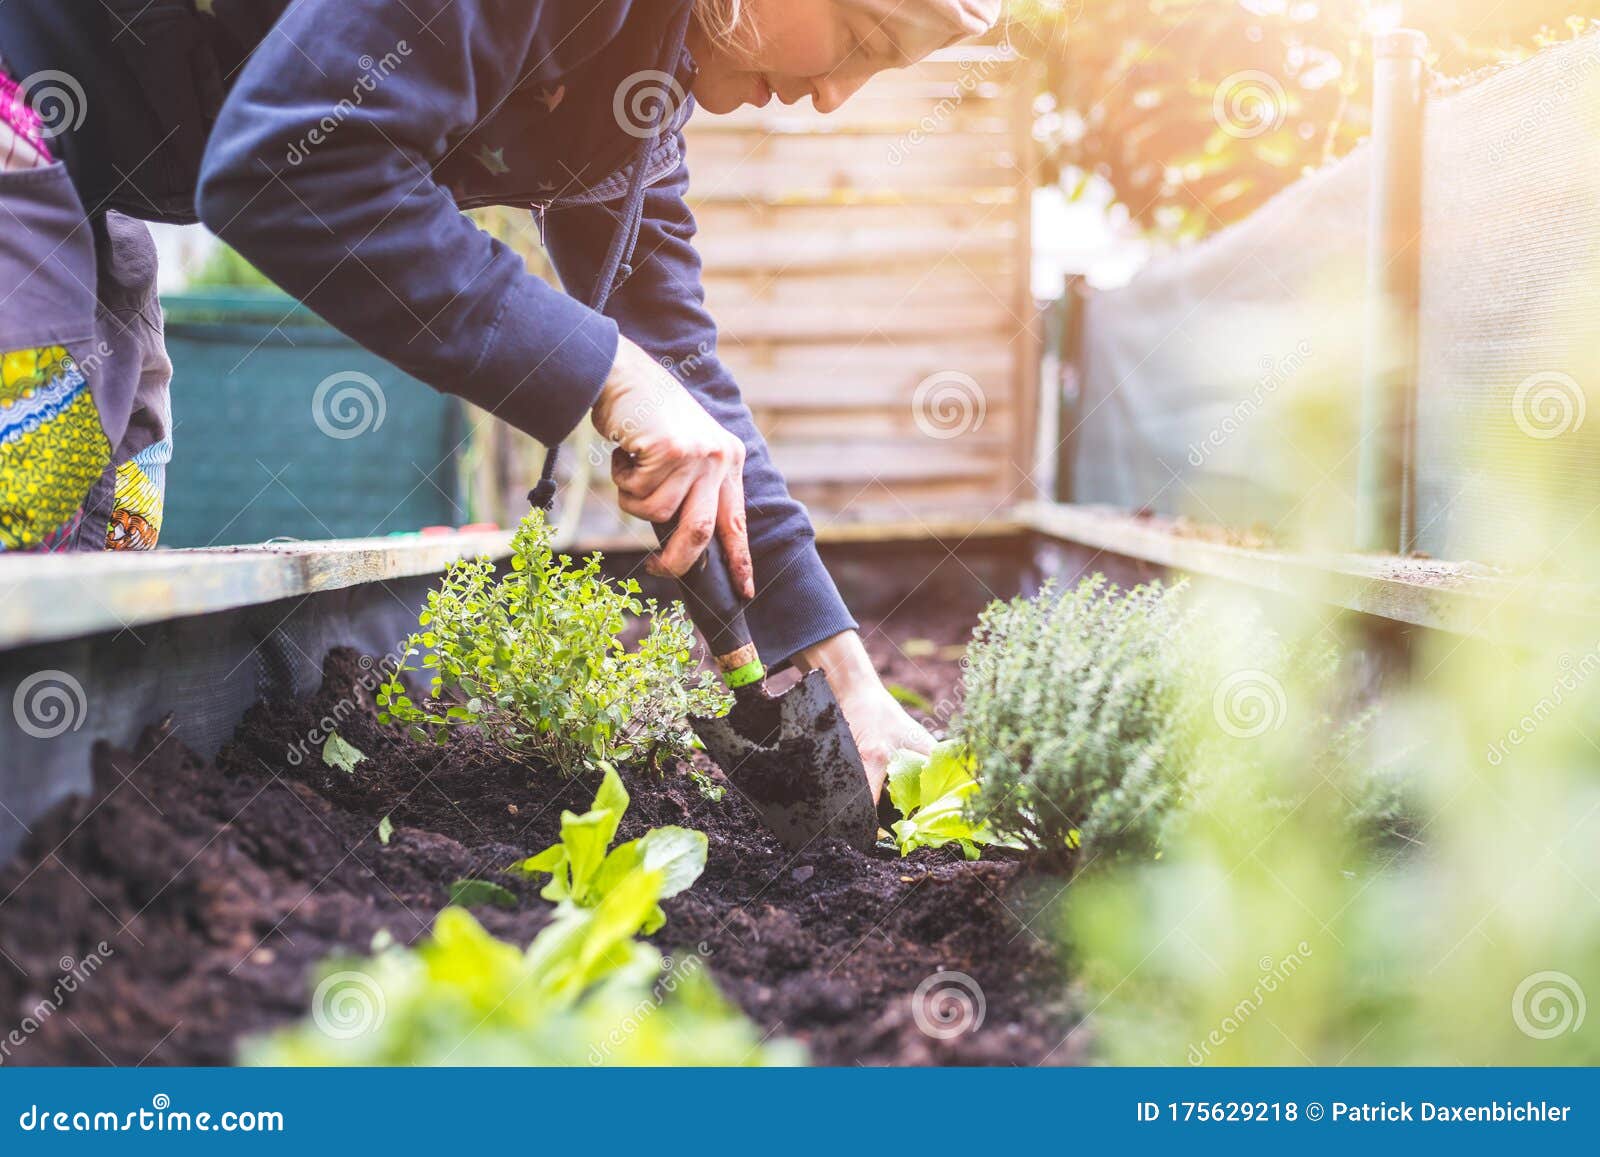 urban gardening: woman is planting fresh vegetables and herbs on fruitful soil in the own garden, raised bed